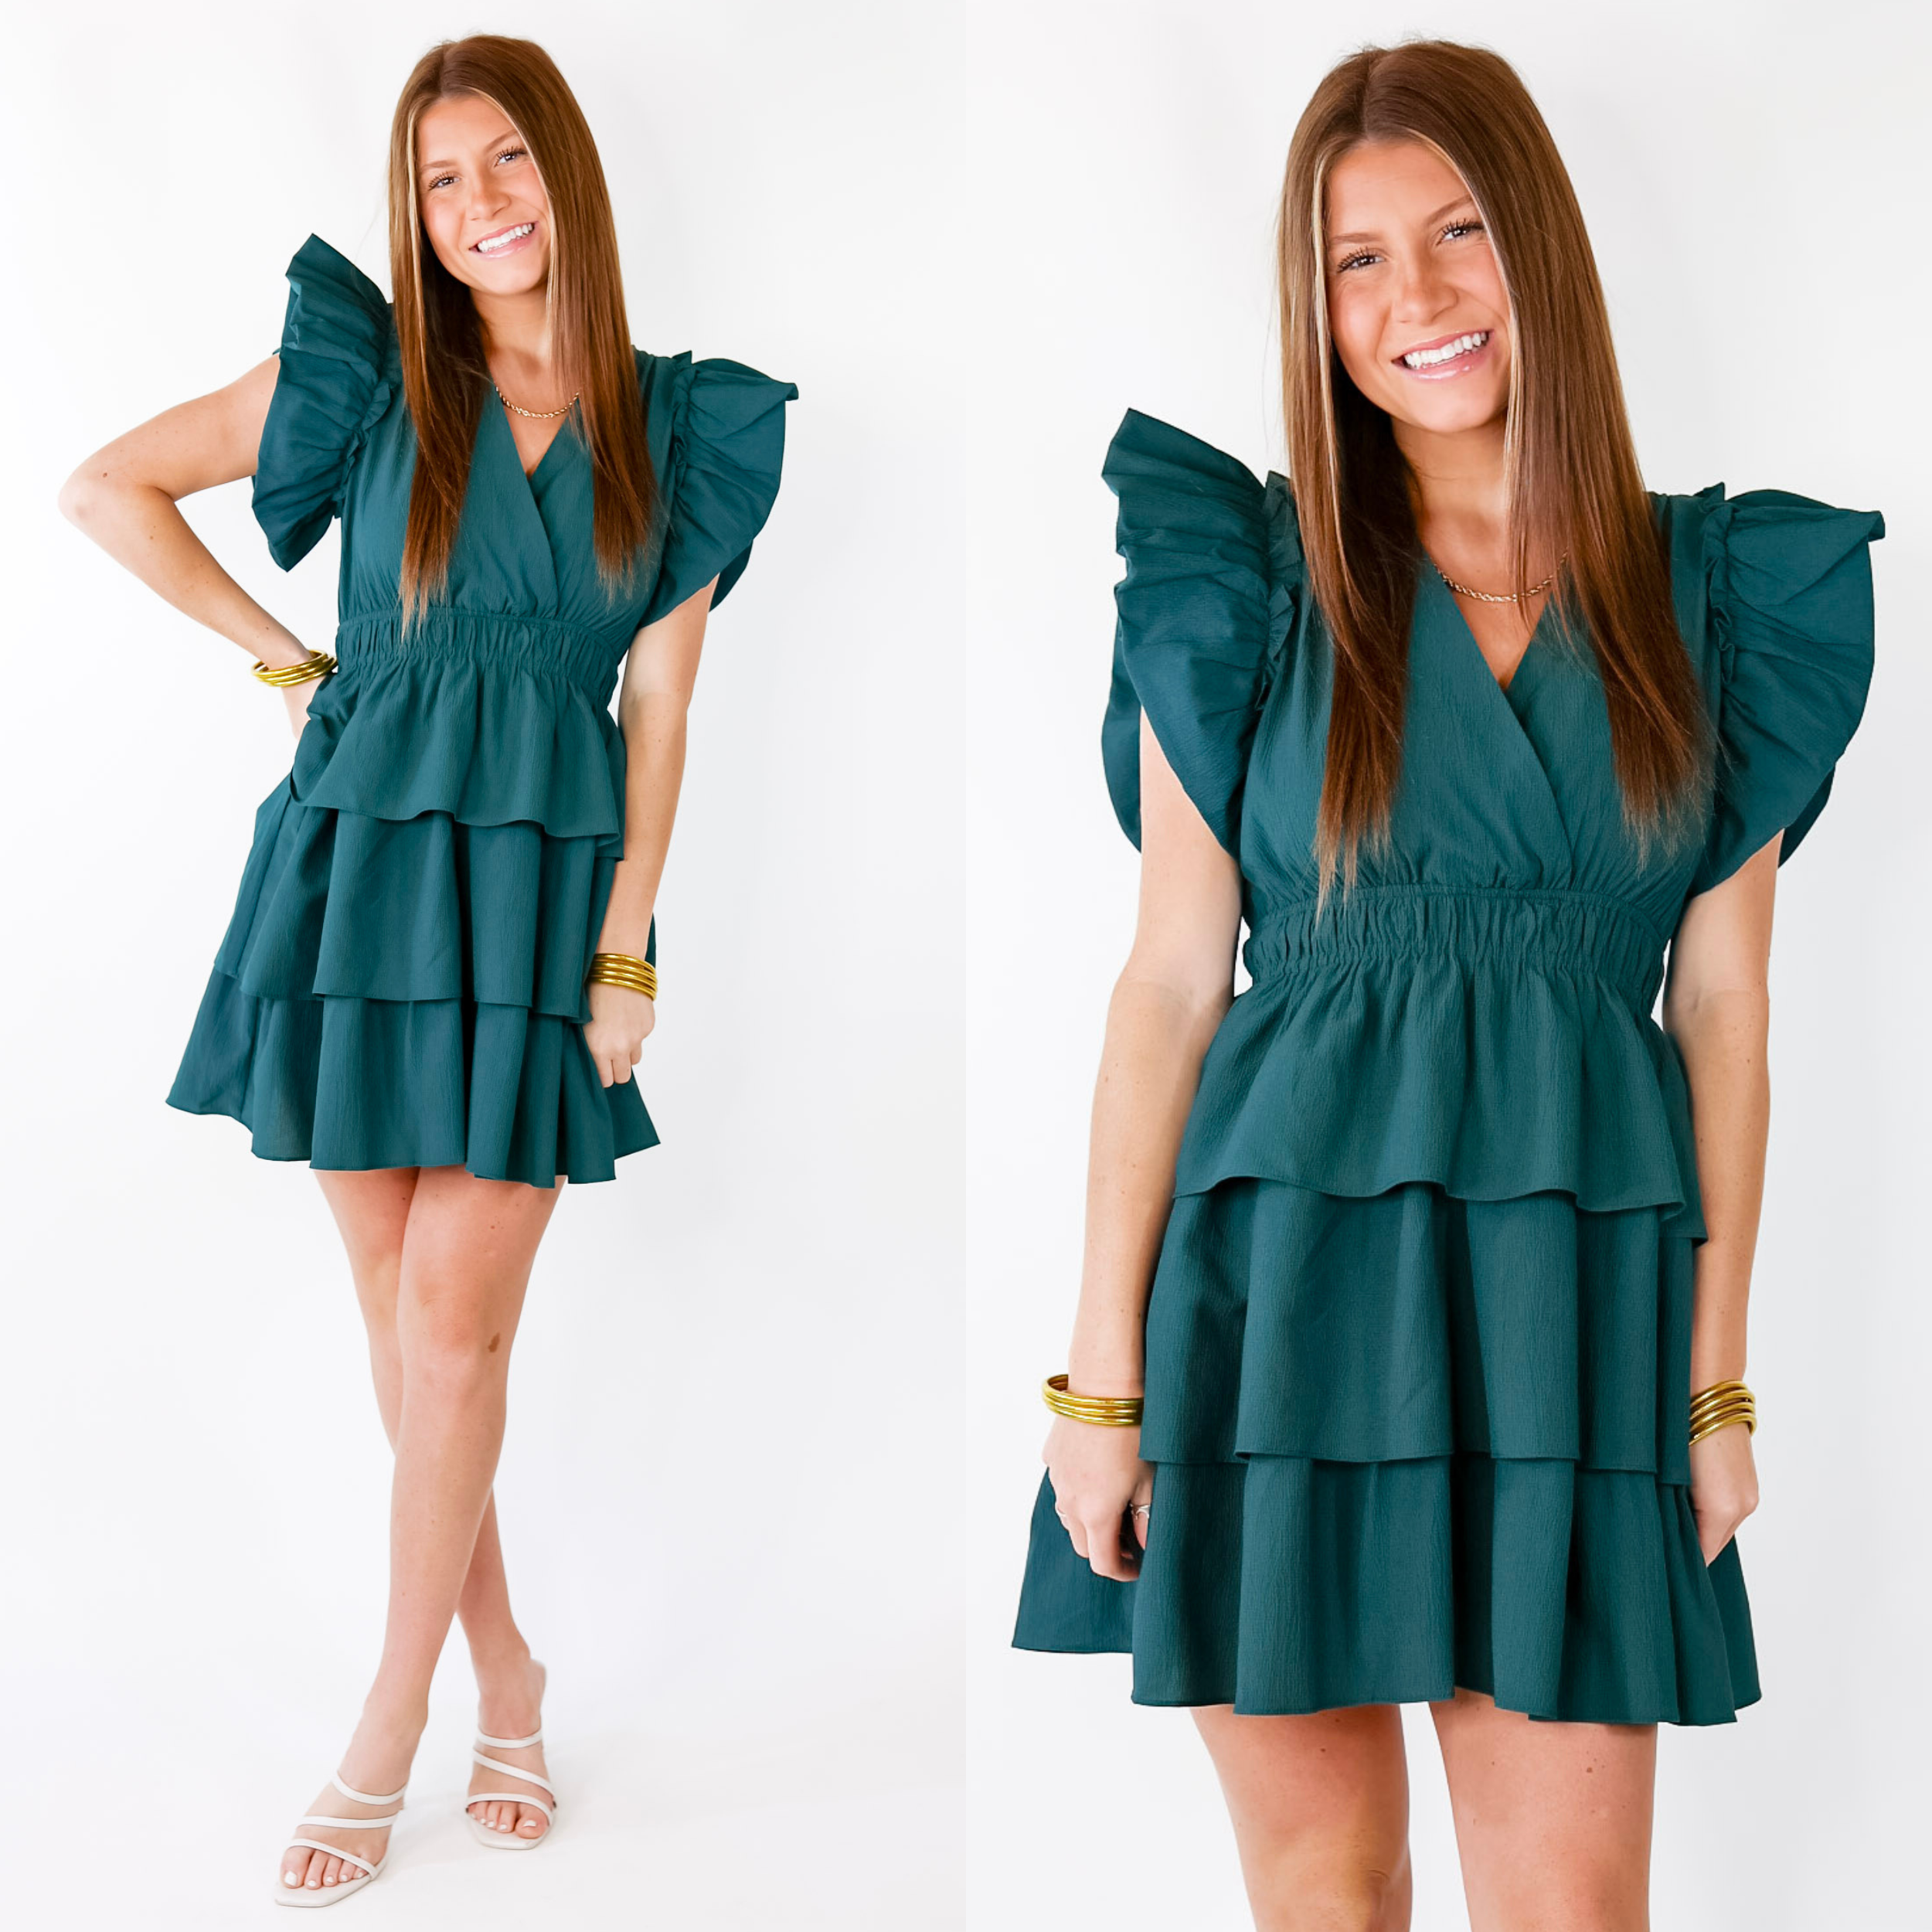 The Perfect Night Ruffle Cap Sleeve Dress in Dark Teal - Giddy Up Glamour Boutique